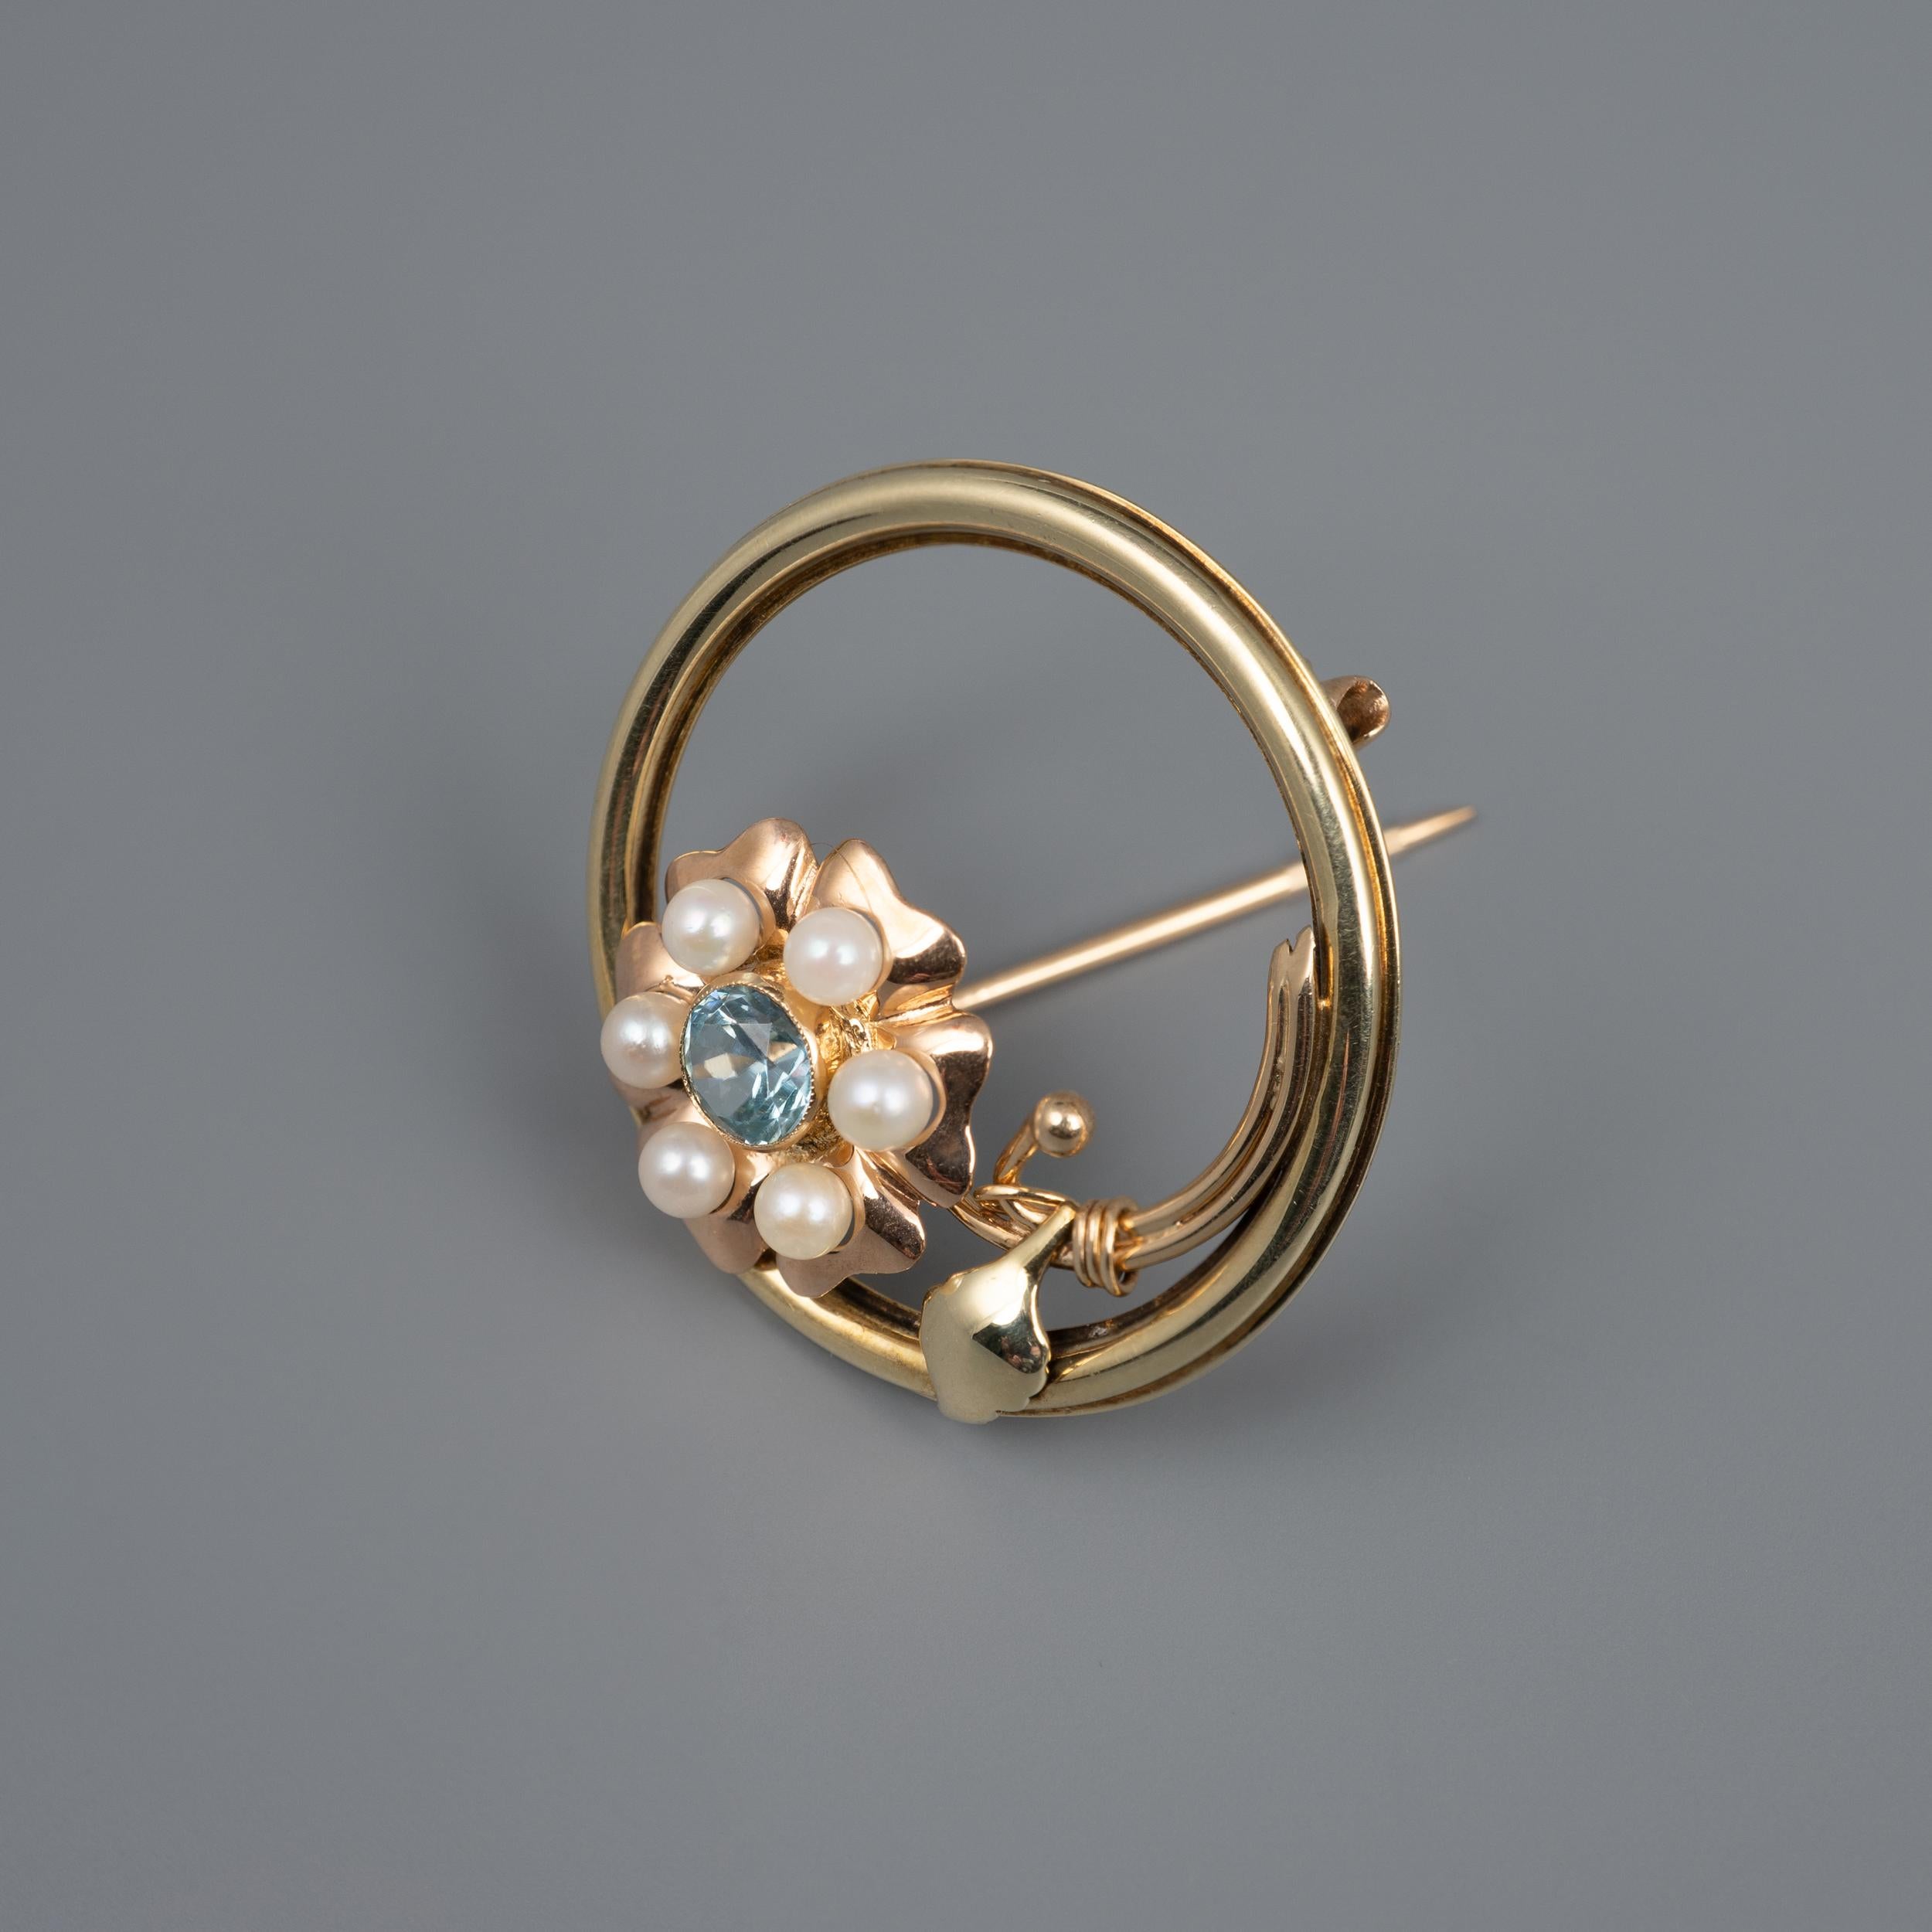 This fantastic 1960s blue zircon and cultured pearl flower brooch is crafted in 2 tone rose and yellow gold - Circa 1960s jewelry

The circular brooch displays a beautiful flower with rose gold petals. The flower is set with a stunning ice blue